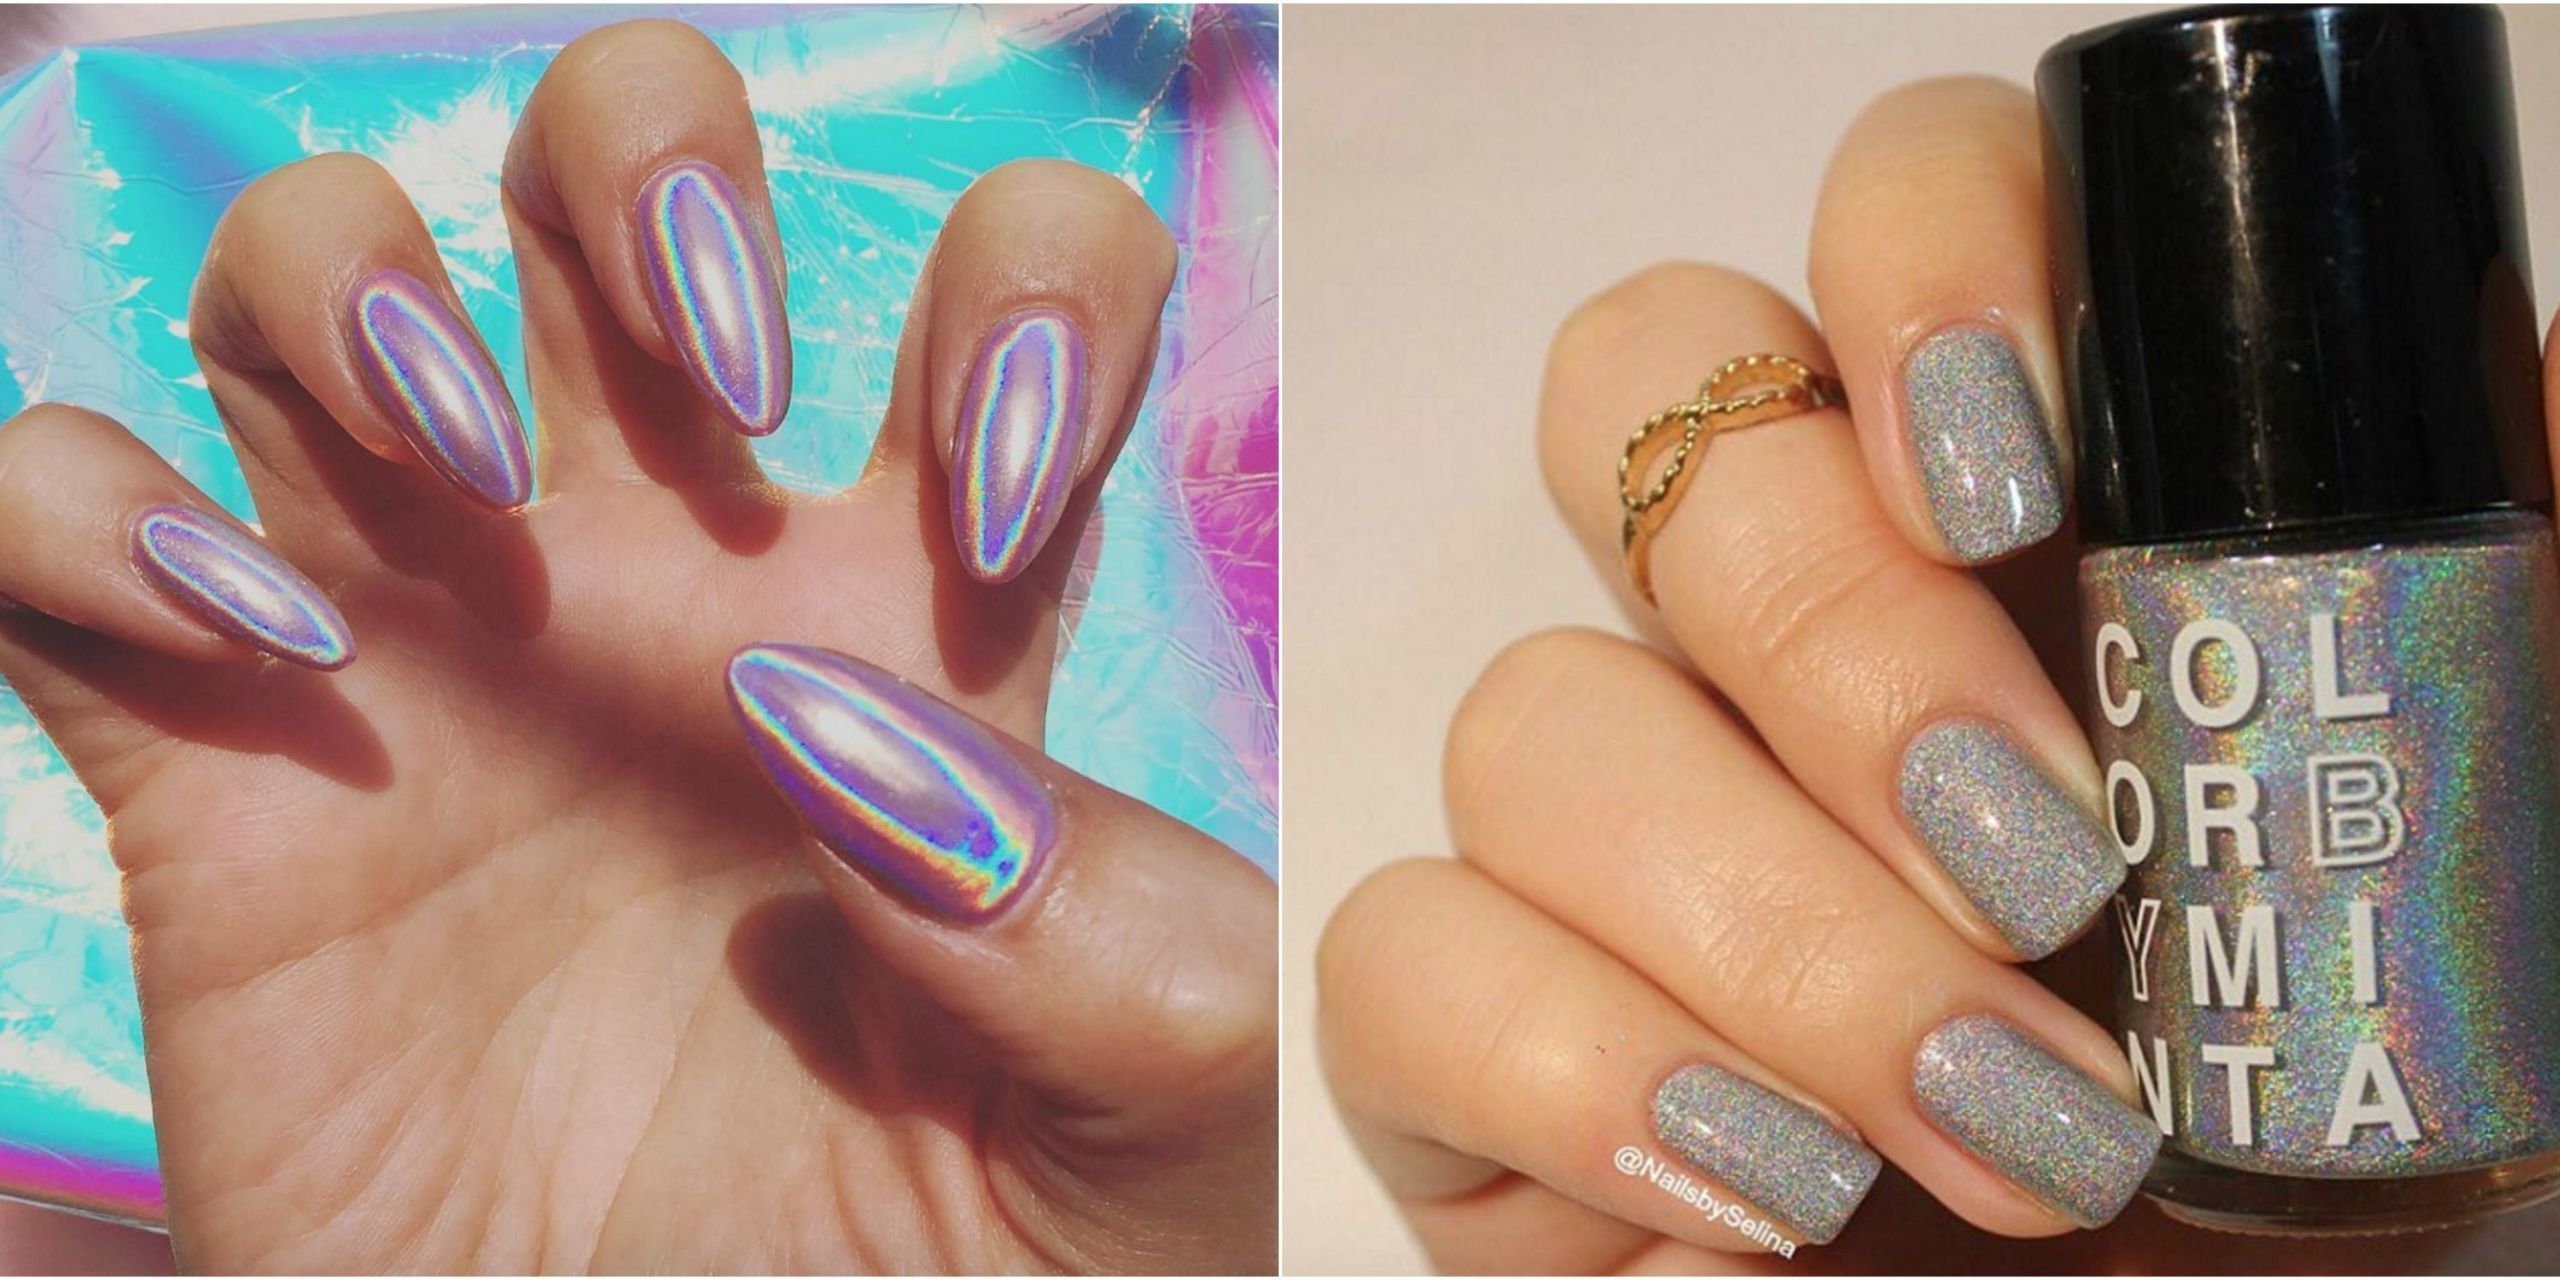 What Is Magnetic Nail Polish And How It Works - Voir Fashion